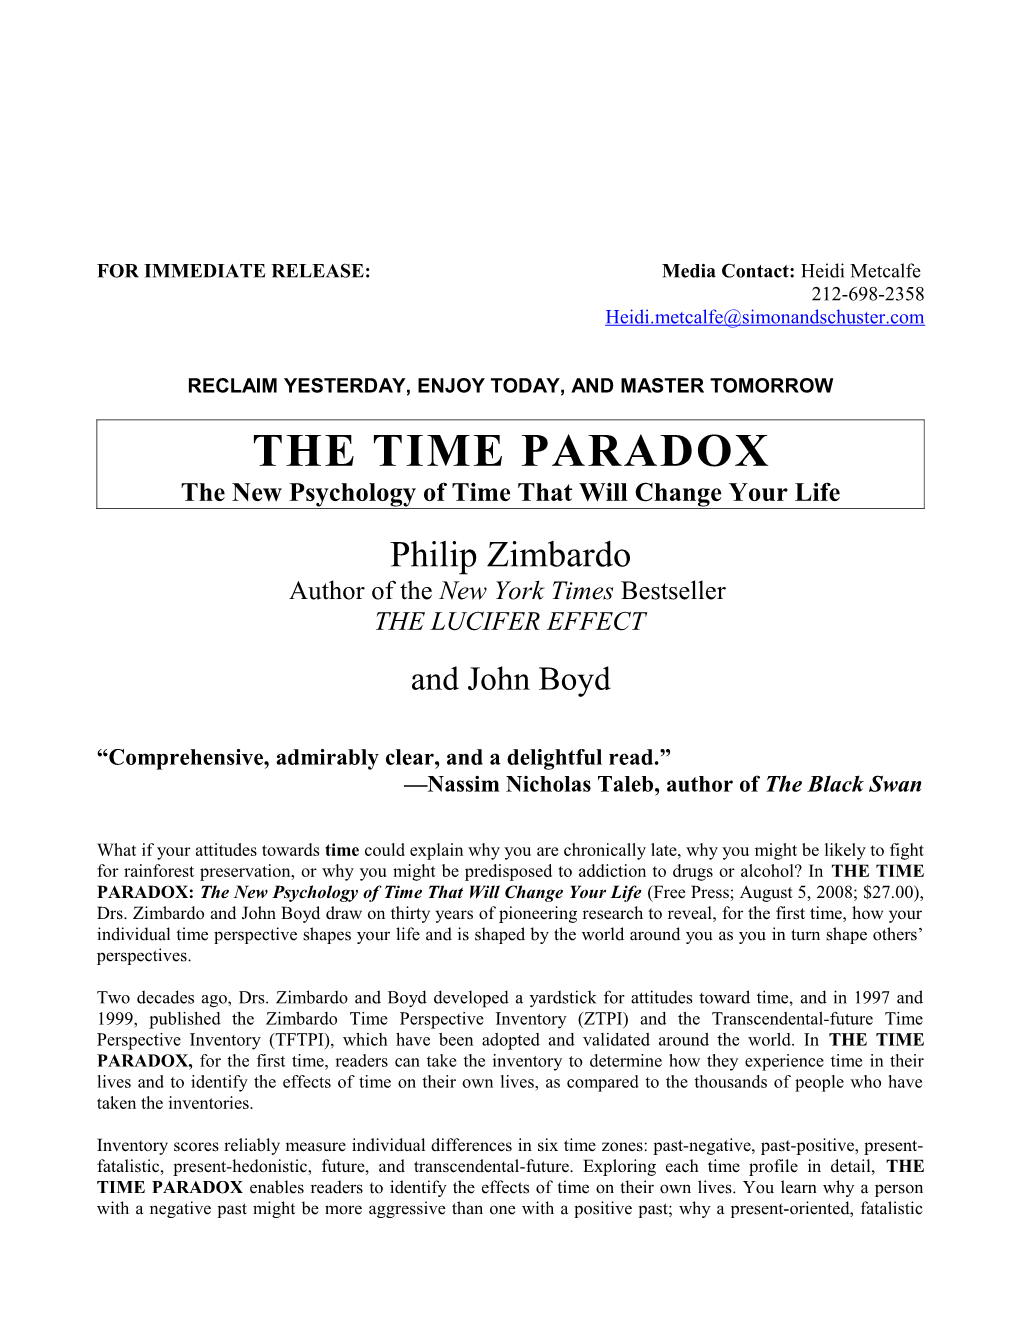 Informed by the World S Foremost Expert on the Psychology of Time, the Time Paradox Combines